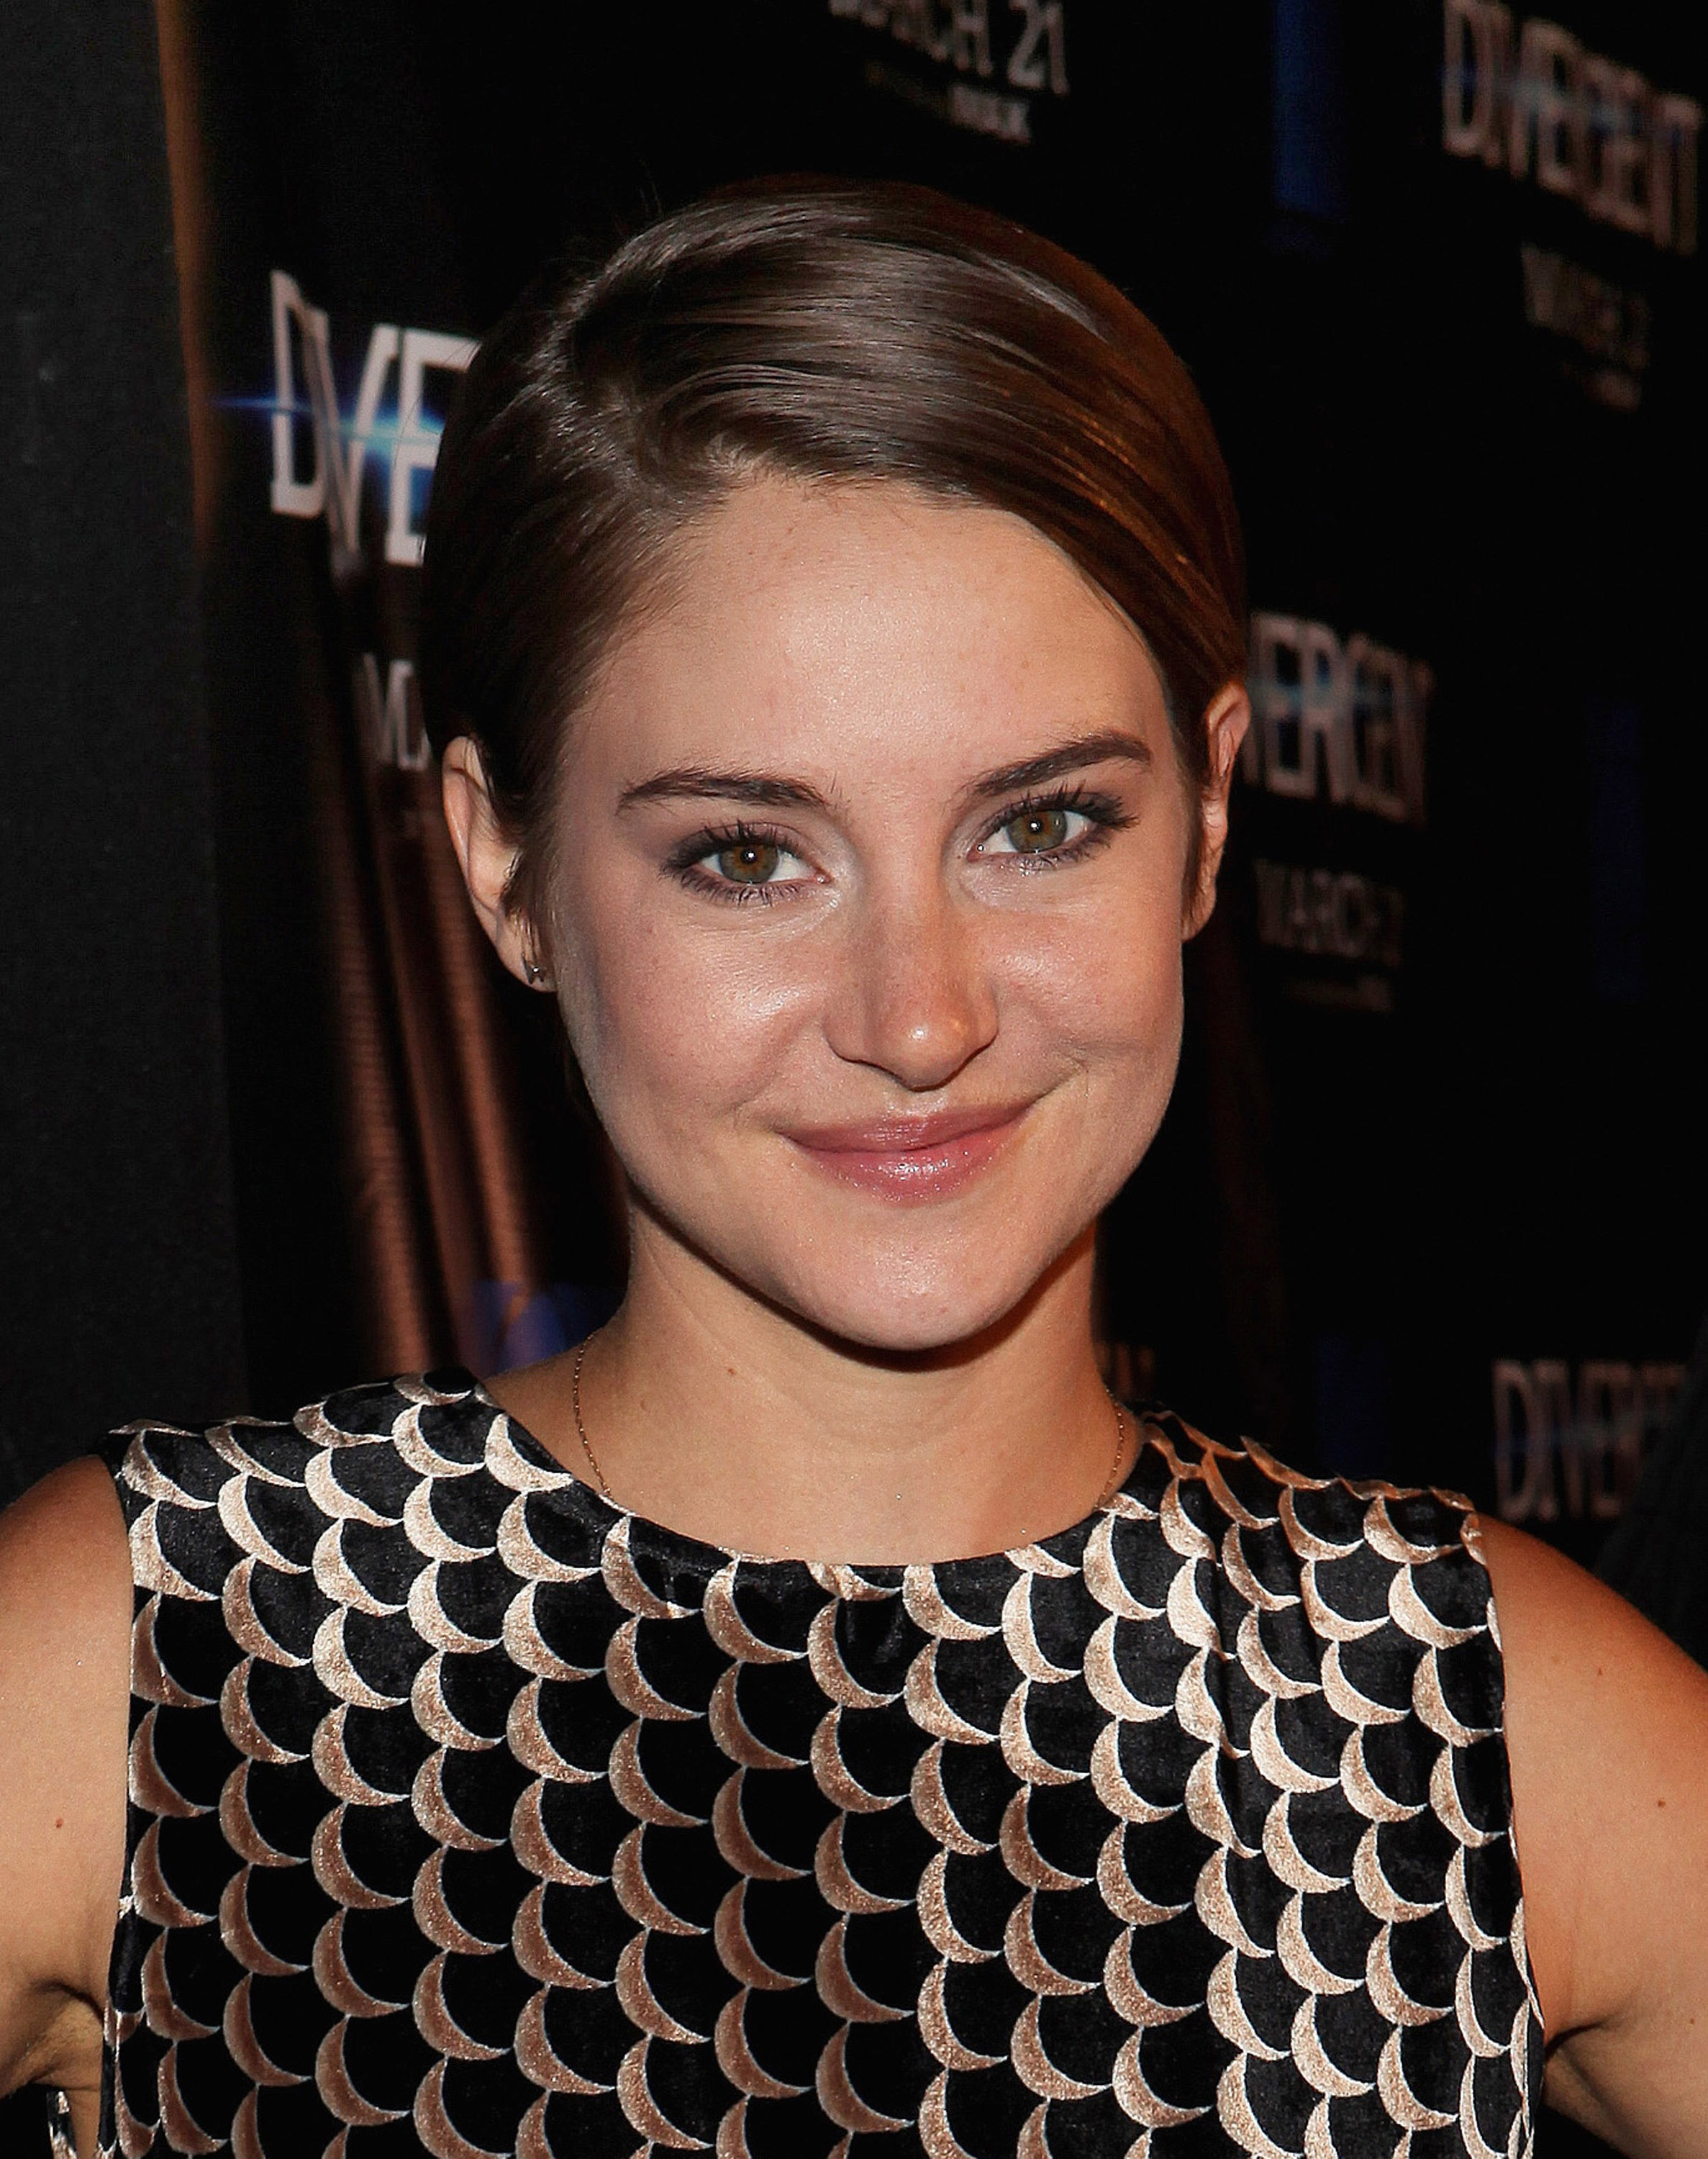 Actress Shailene Woodley poses for photos on the red carpet for the "Divergent" screening at Kerasotes Showplace ICON on March 4, 2014 in Chicago, Illinois (Raymond Boyd—Getty Images)